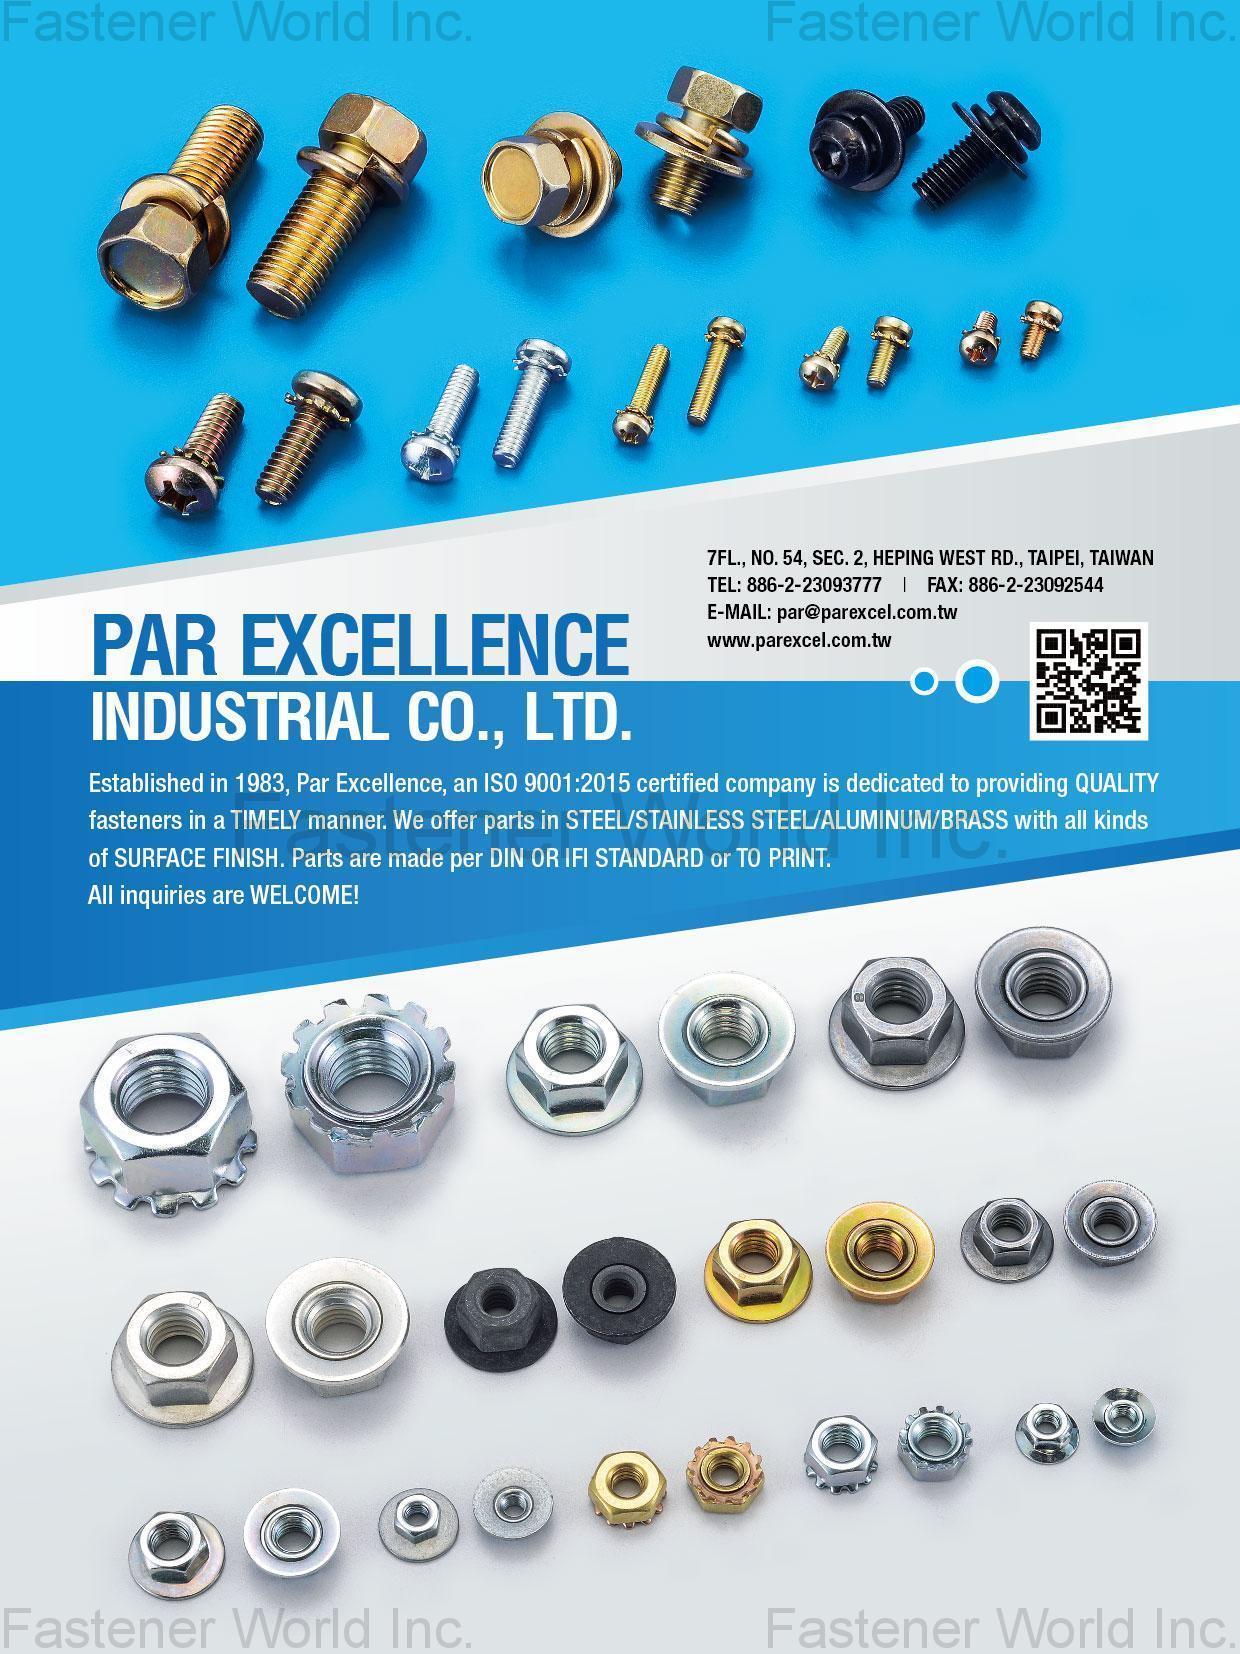 PAR EXCELLENCE INDUSTRIAL CO., LTD.  , Steel / Stainless Steel / Aluminum / Brass Parts , Special Metal Parts